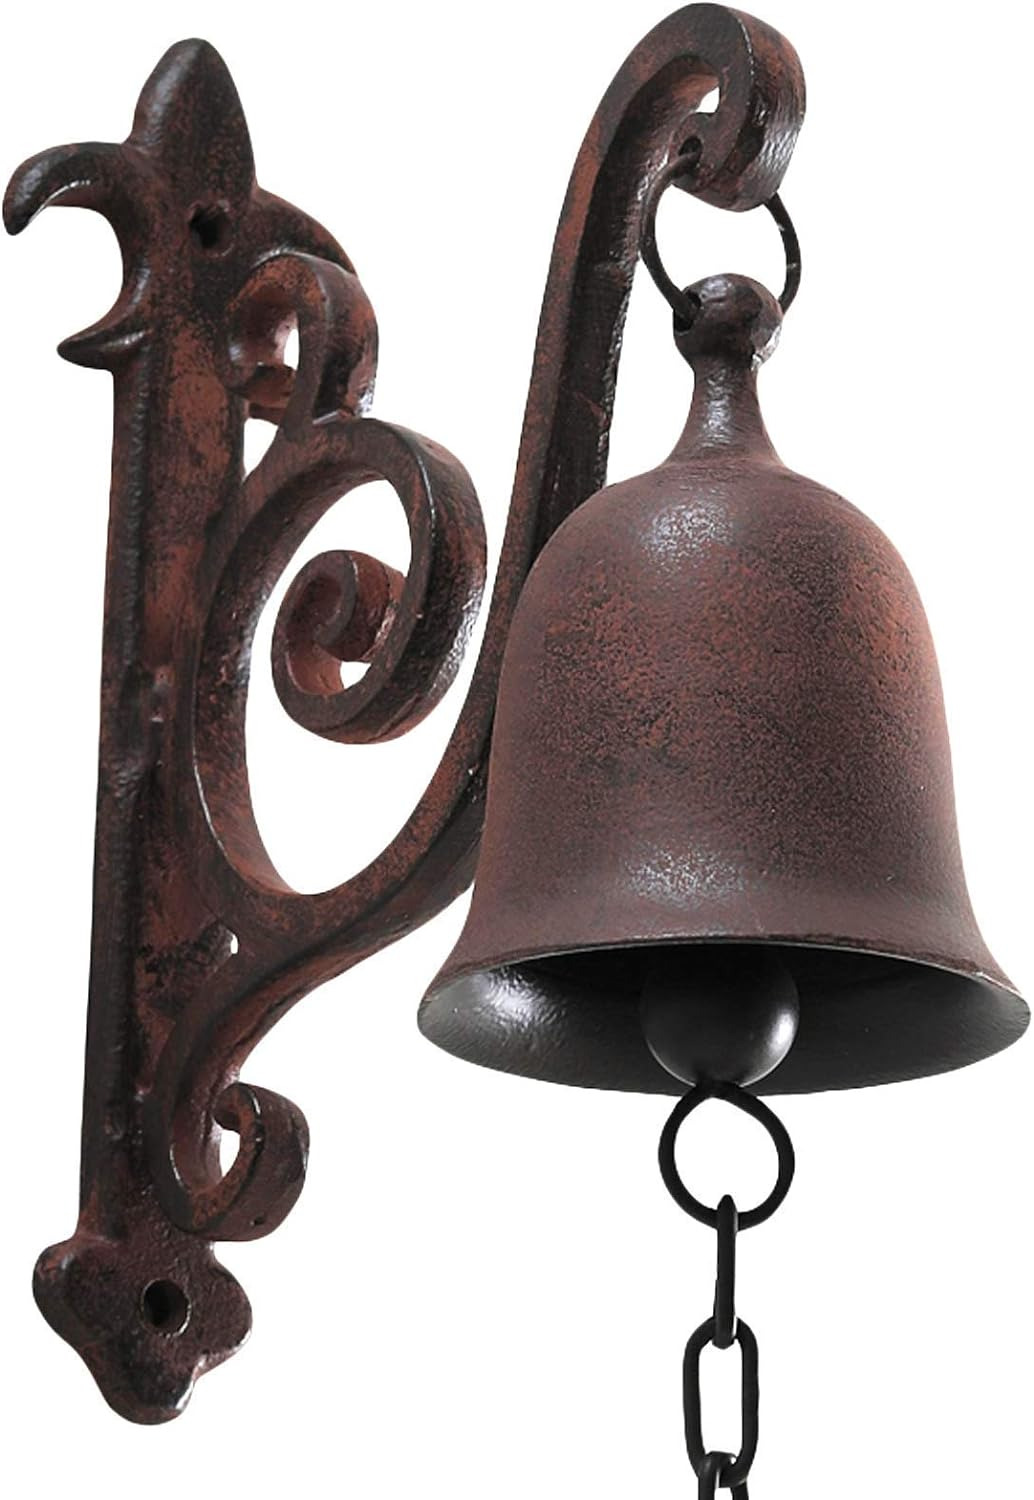 Vintage Cast Iron Dinner Bell as Entry Door Bell, outside Hanging Decor or Indoo